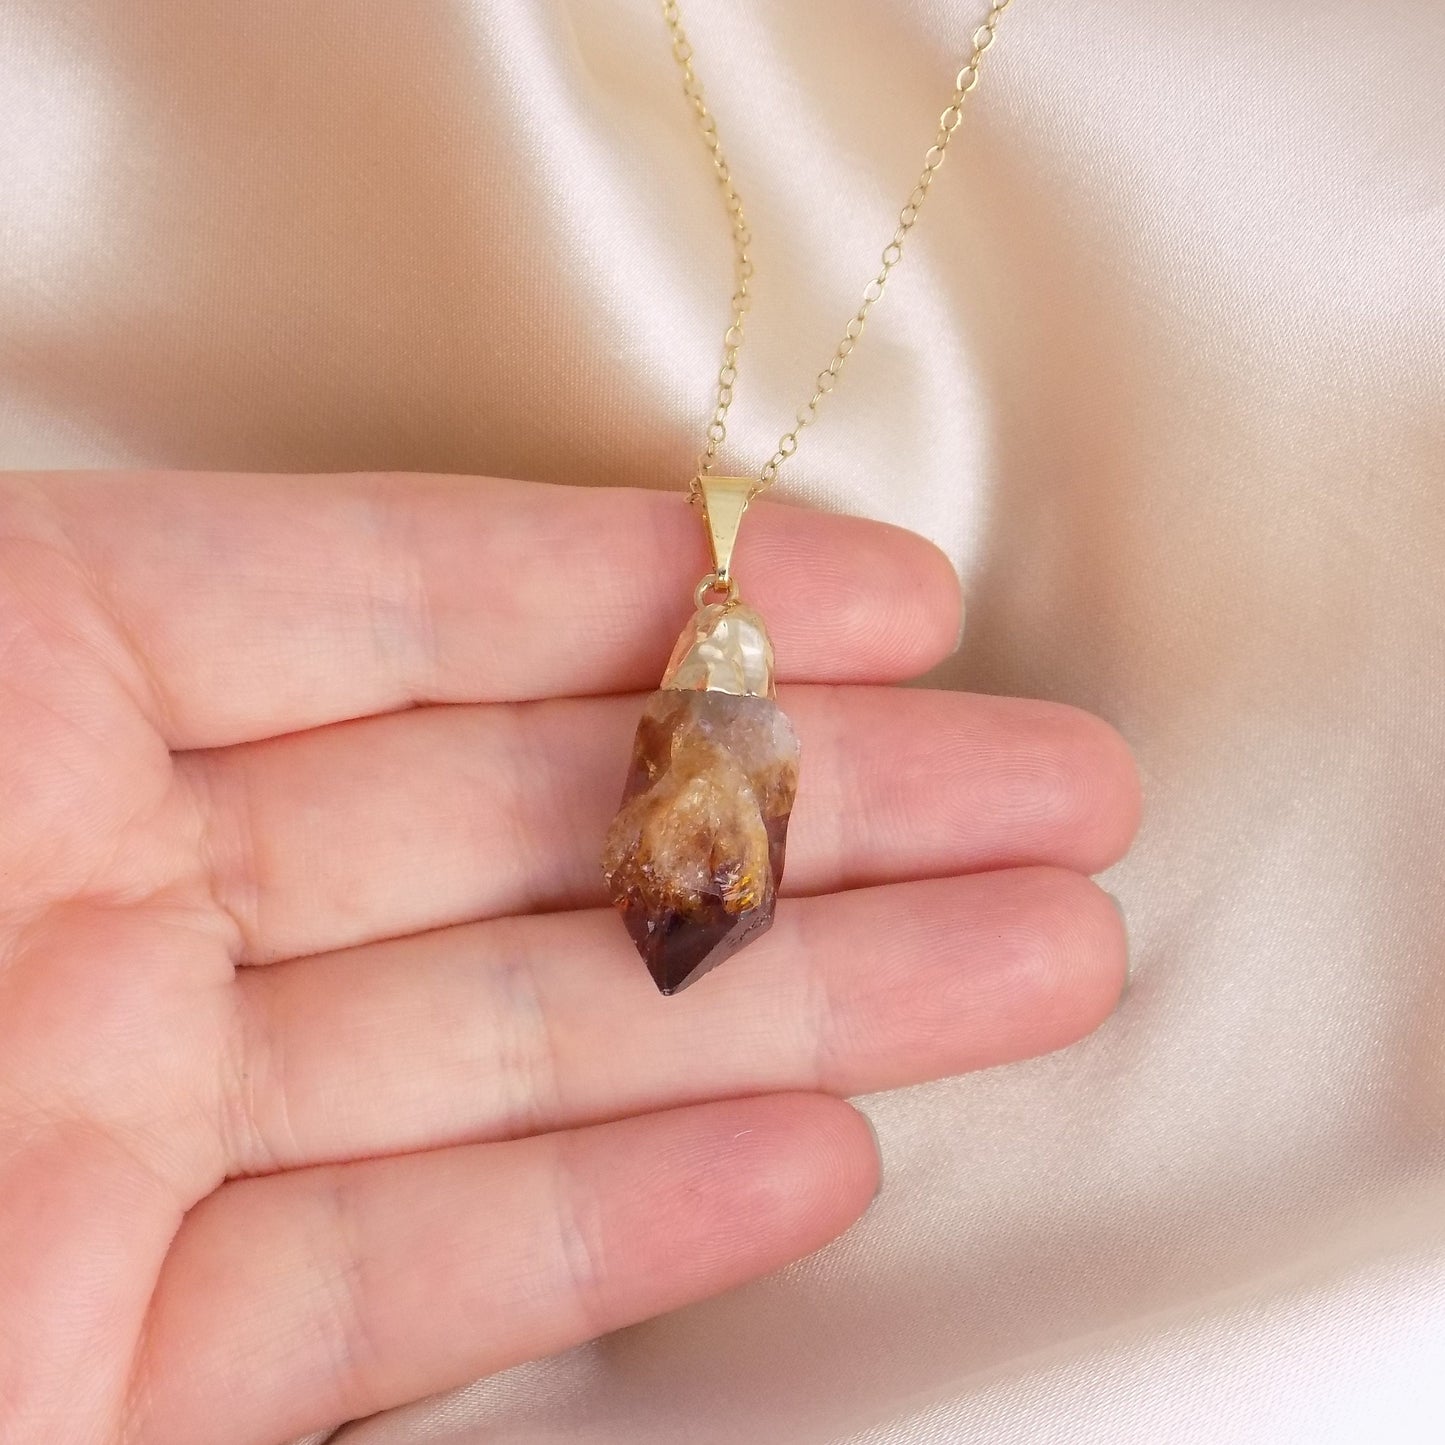 Brown Citrine Crystal Necklace Gold - November Birthstone Jewelry - Christmas Gift For Her - G15-248